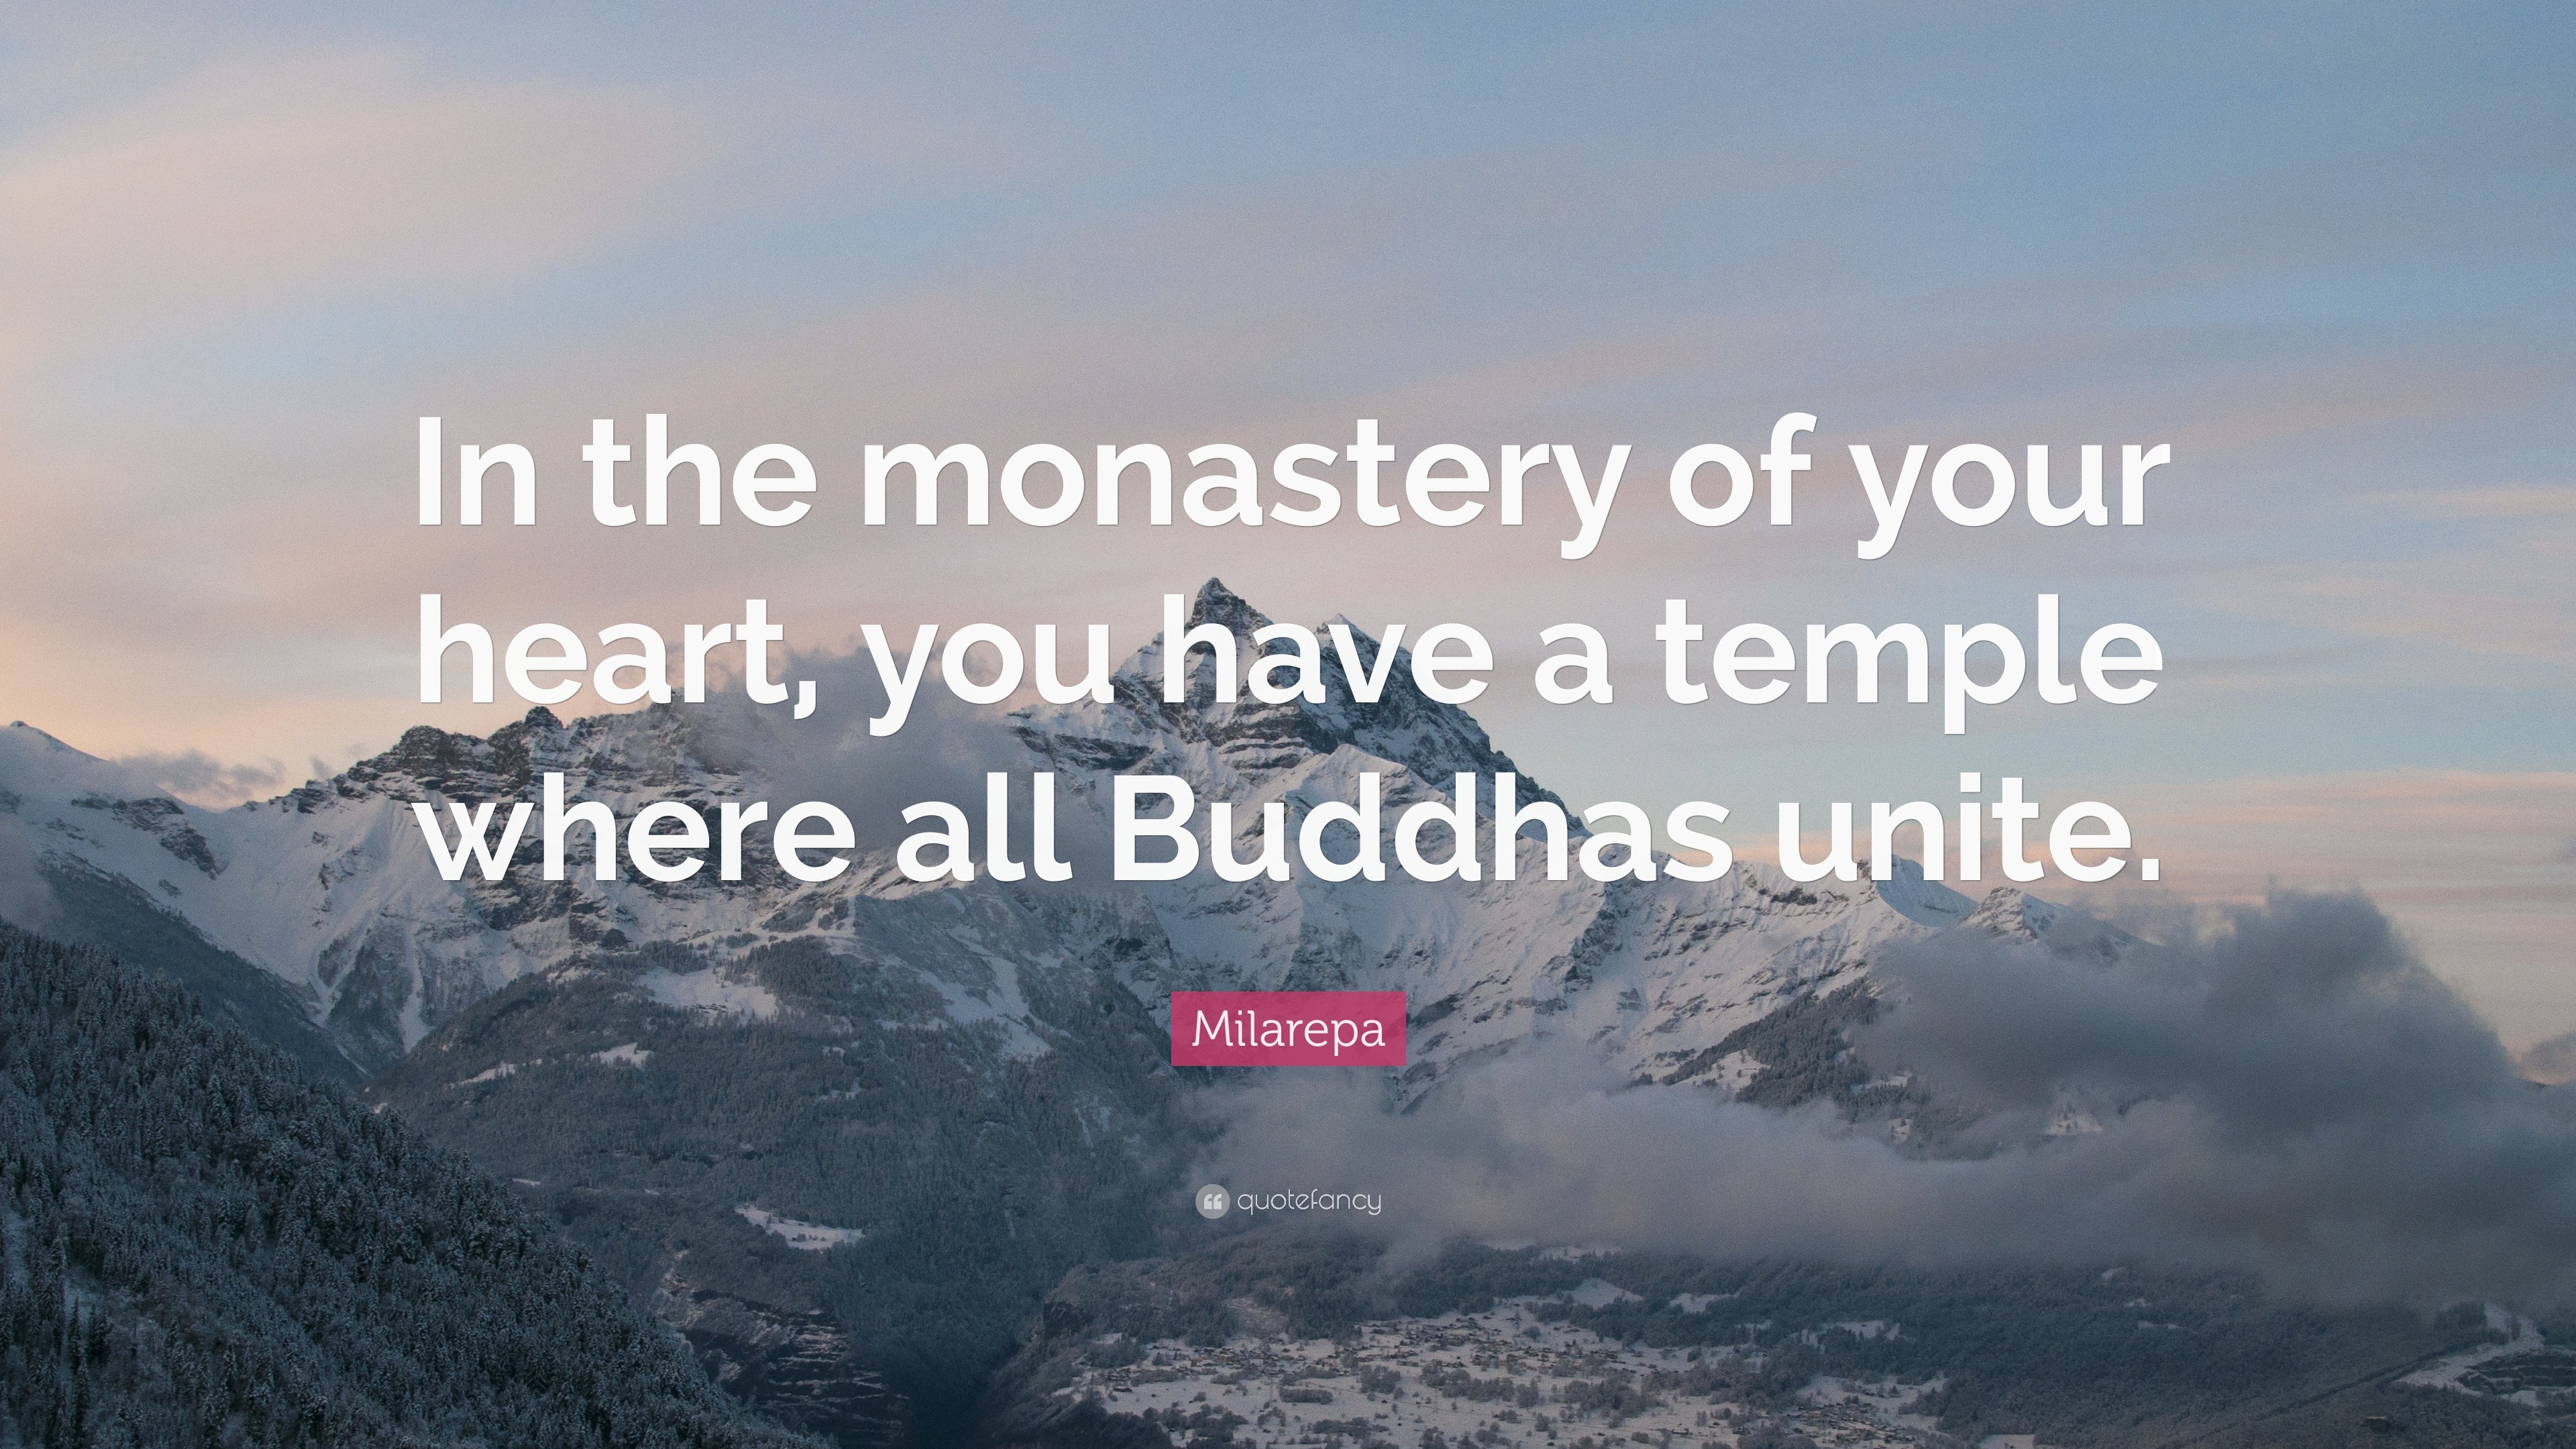 1778186-Milarepa-Quote-In-the-monastery-of-your-heart-you-have-a-temple.jpg